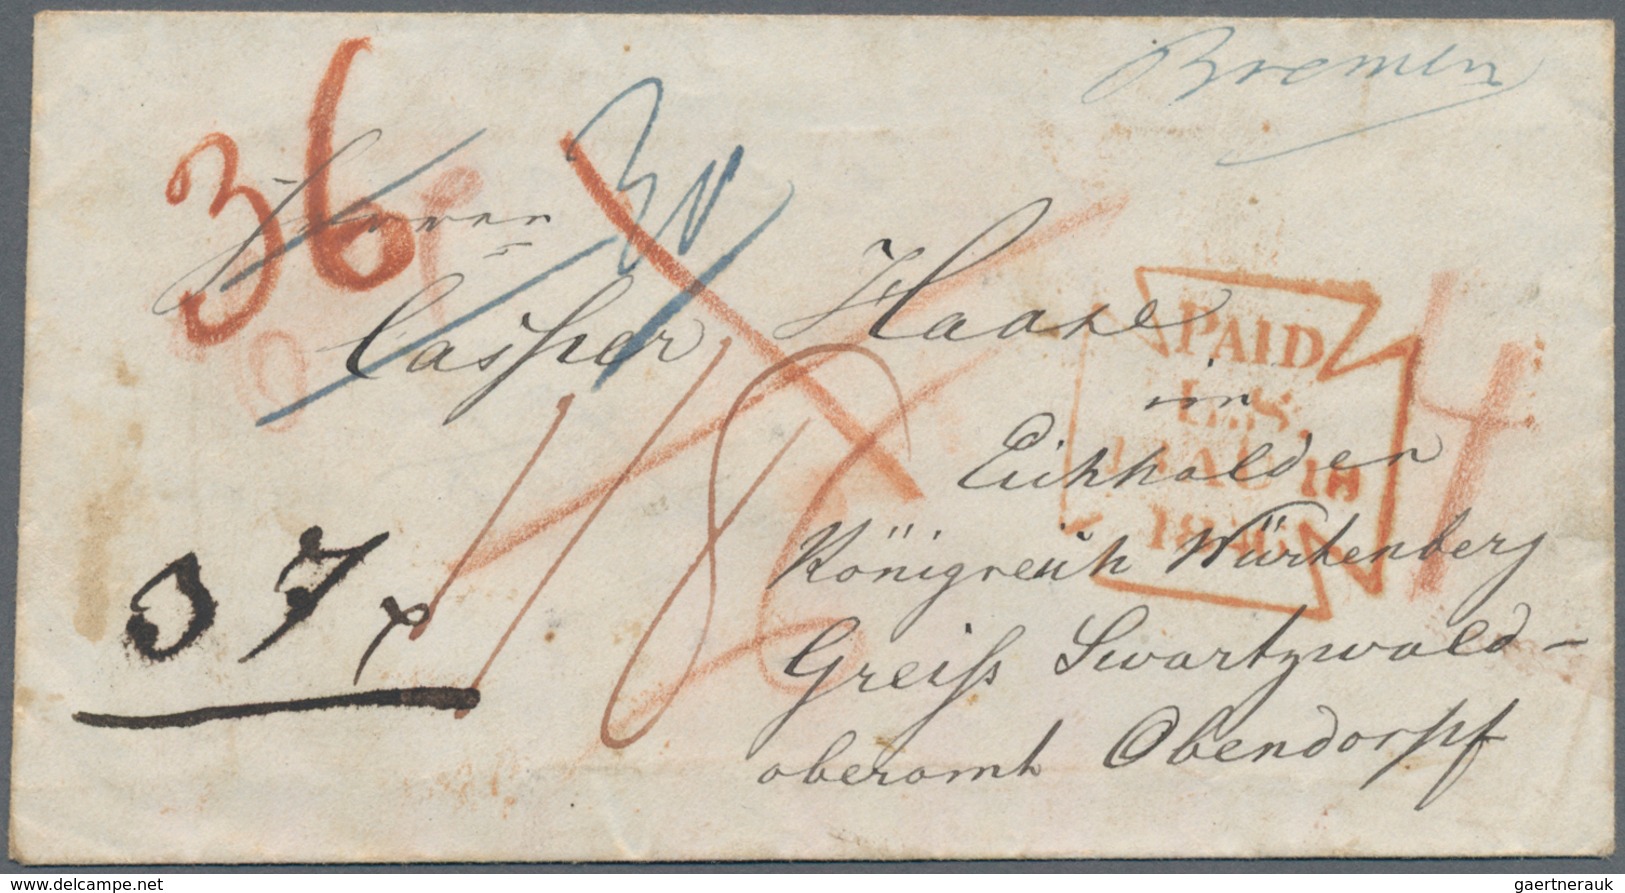 Transatlantikmail: 1823-1865 USA-Europe Transatlantic mail: Collection of 32 stampless covers from t